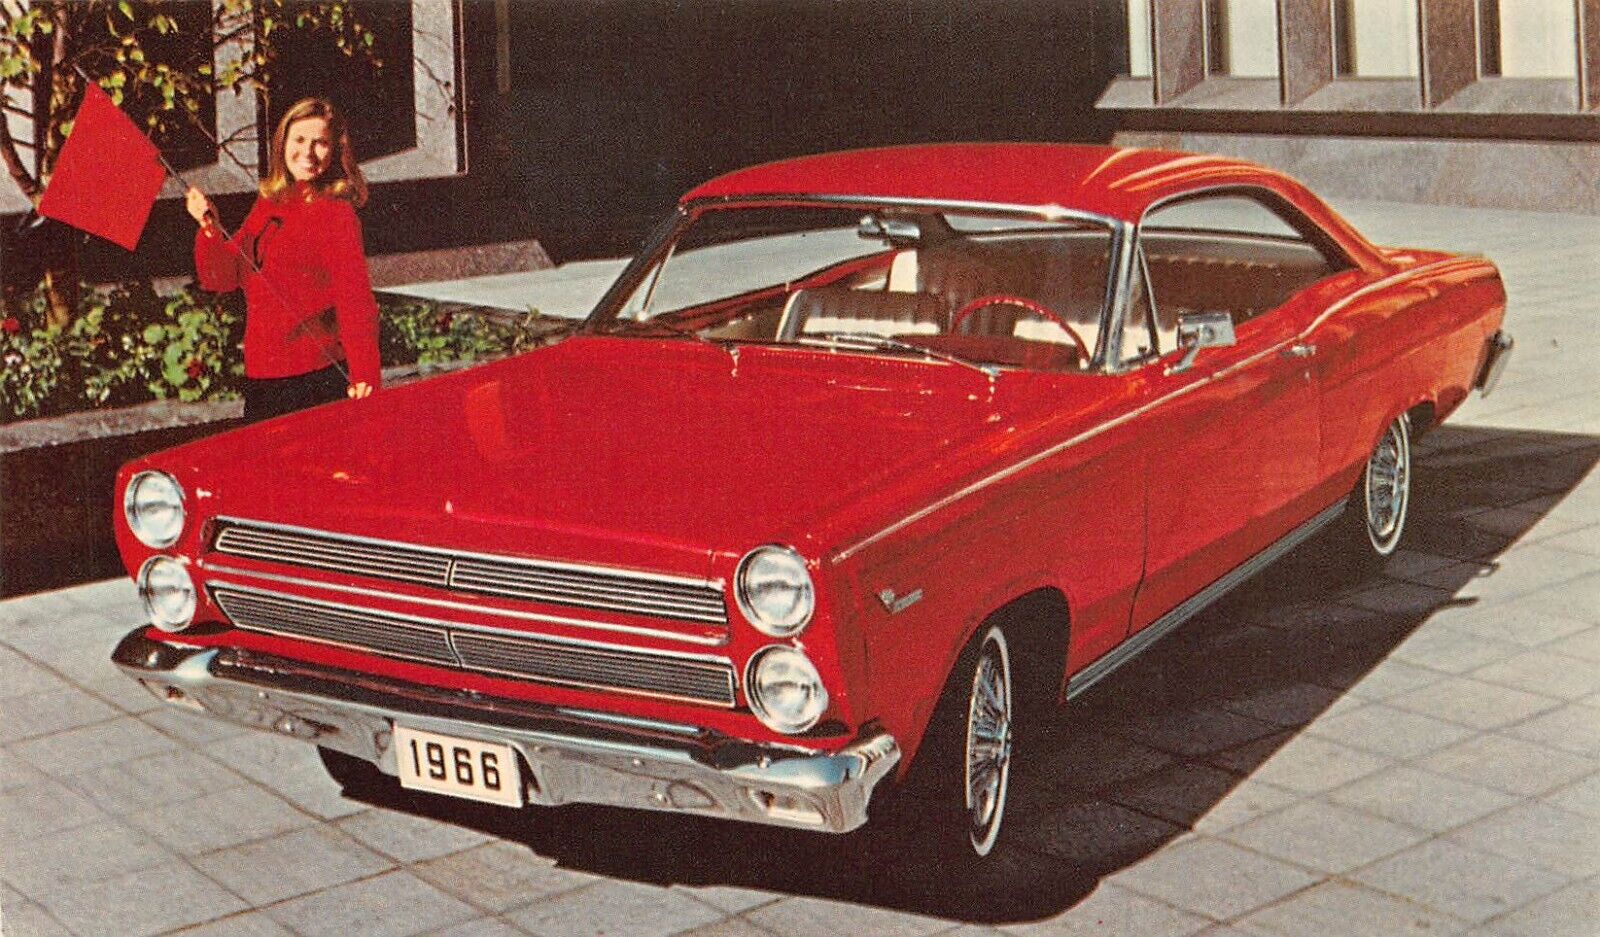 1966 MERCURY Comet Classic Car promotional specification card advertising Girl